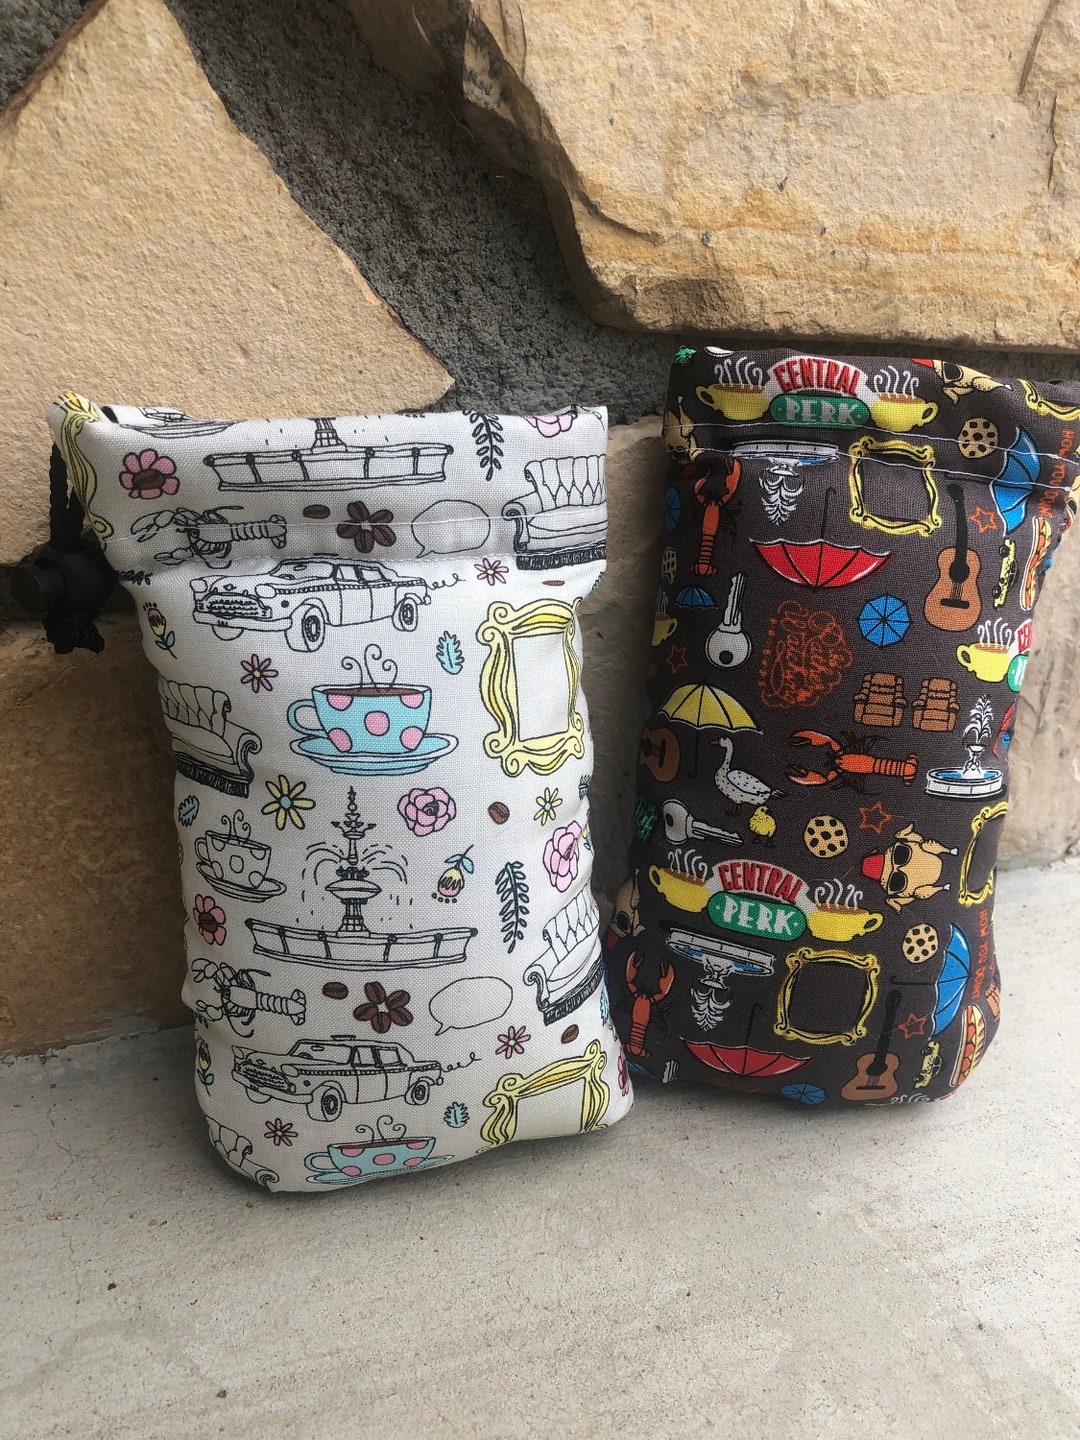 Friends Padded Drawstring Bag Pipe Pouch Sunglasses Case - Etsy